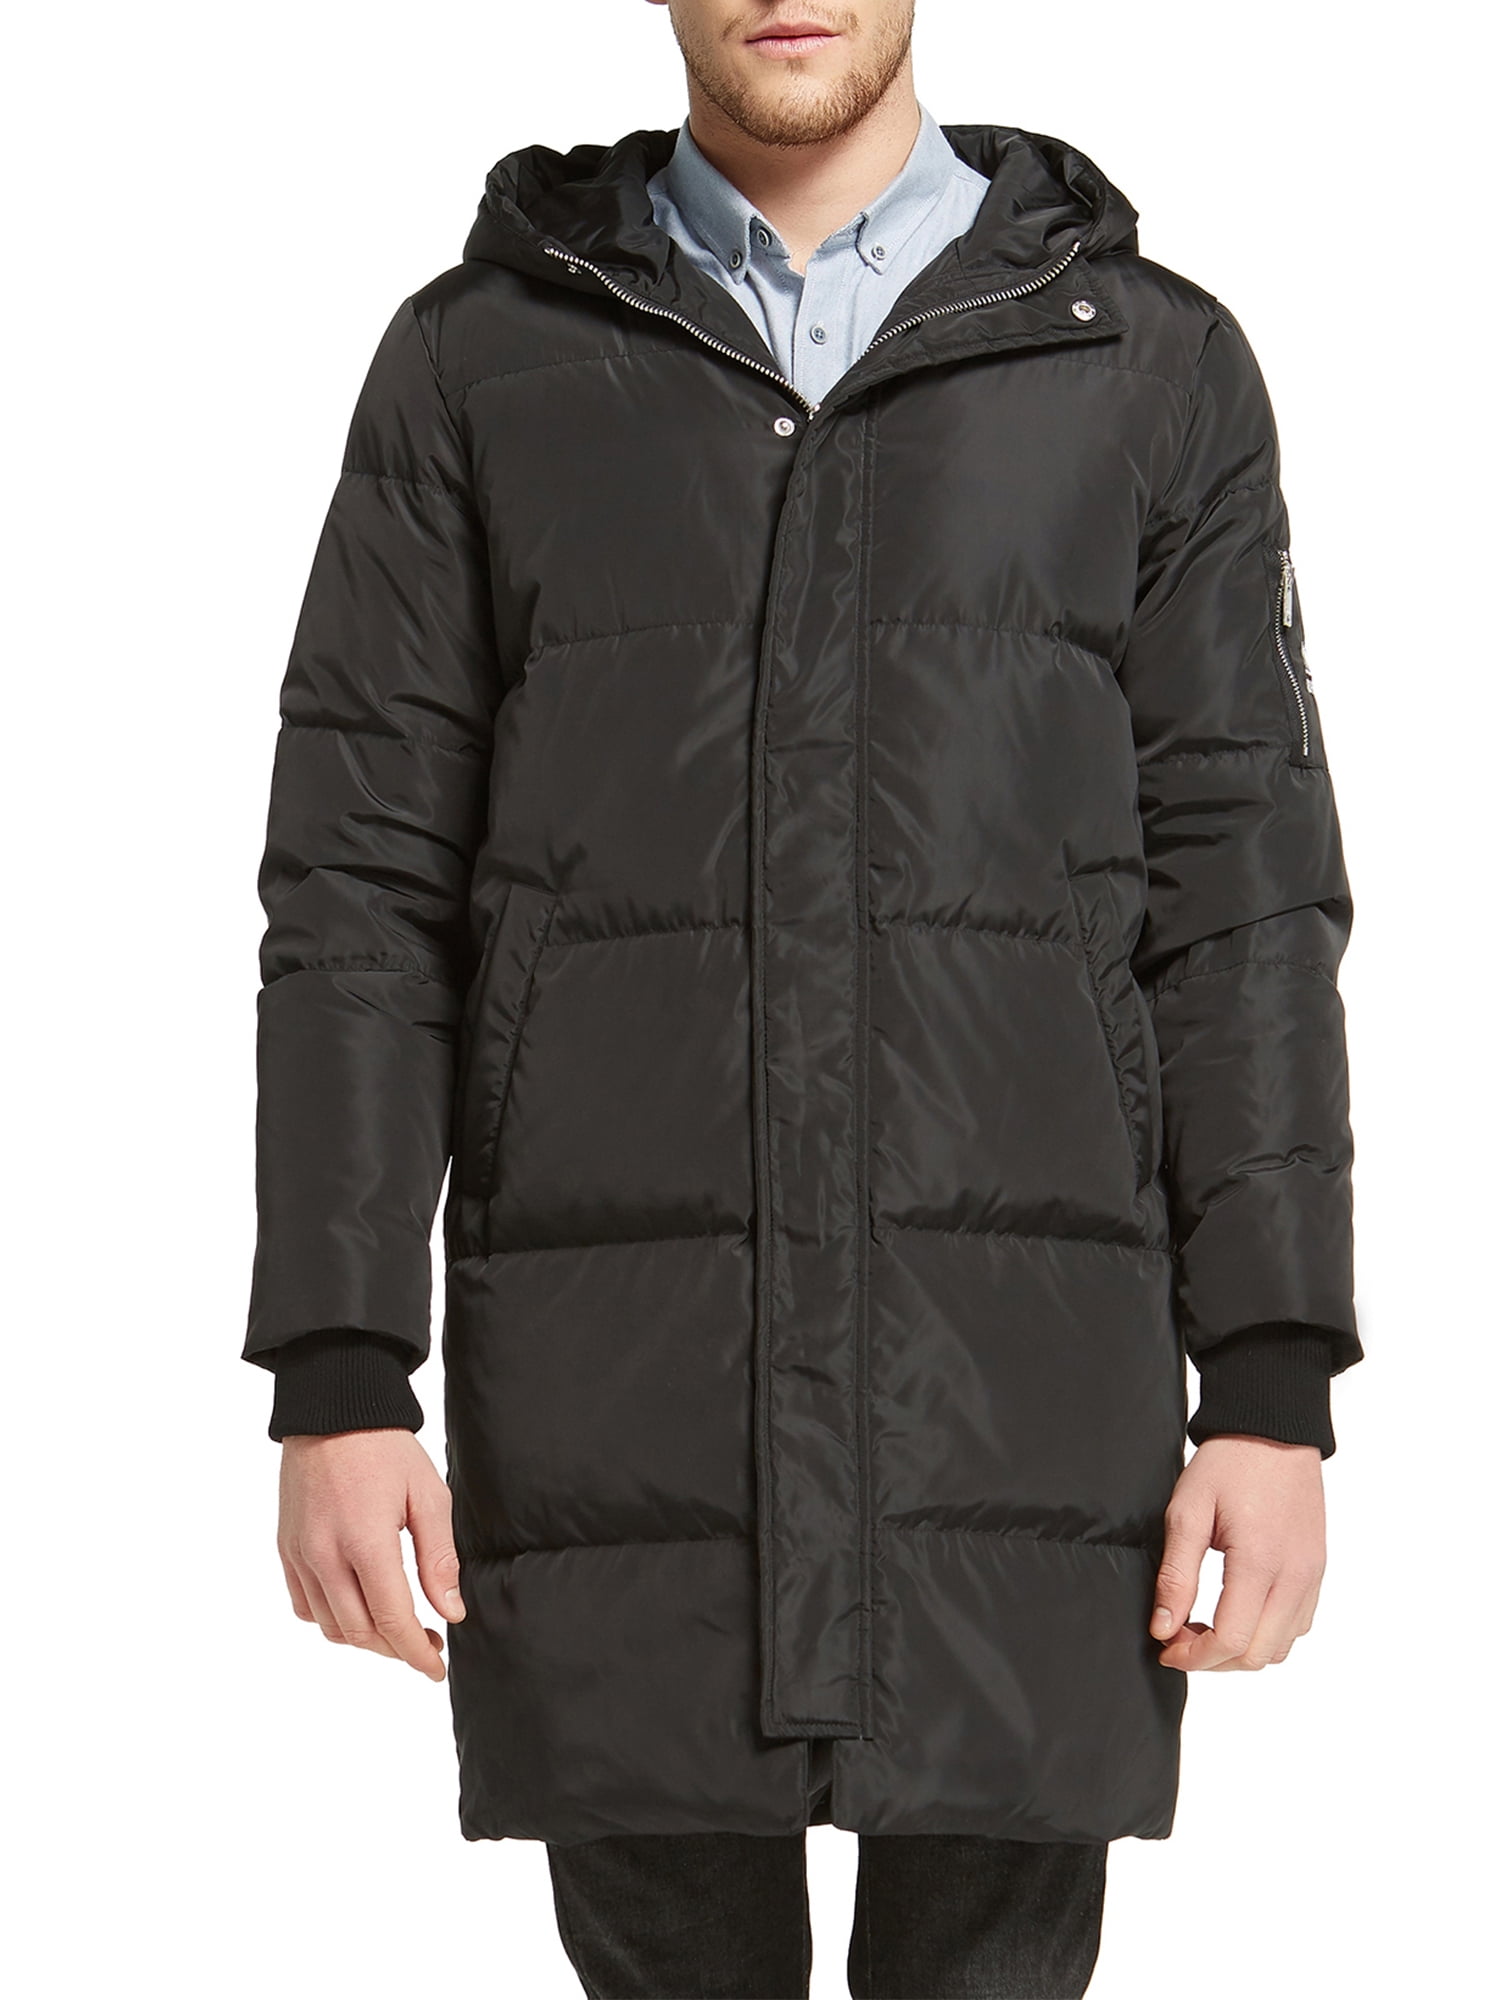 Orolay Men's Winter Down Jacket Down Puffer Jacket Plus Size